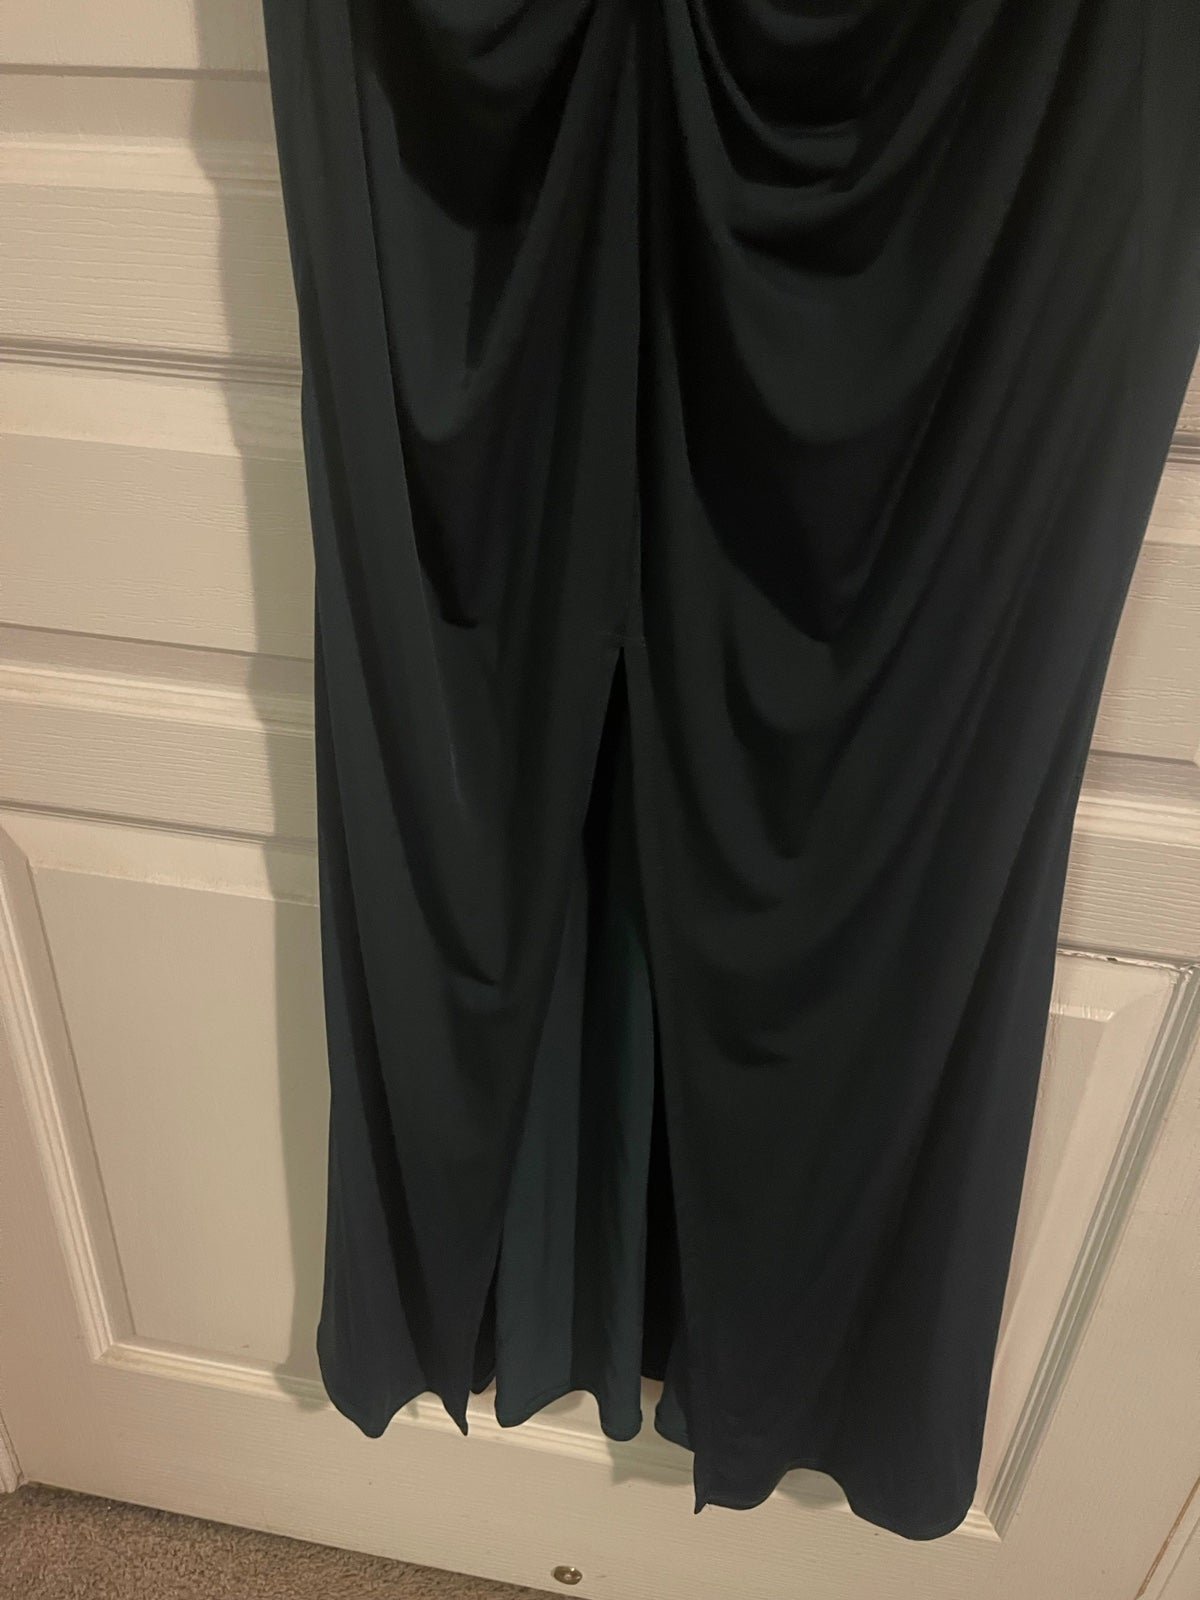 cheapest place to buy  Dark green formal dress p92MmMVNr for sale